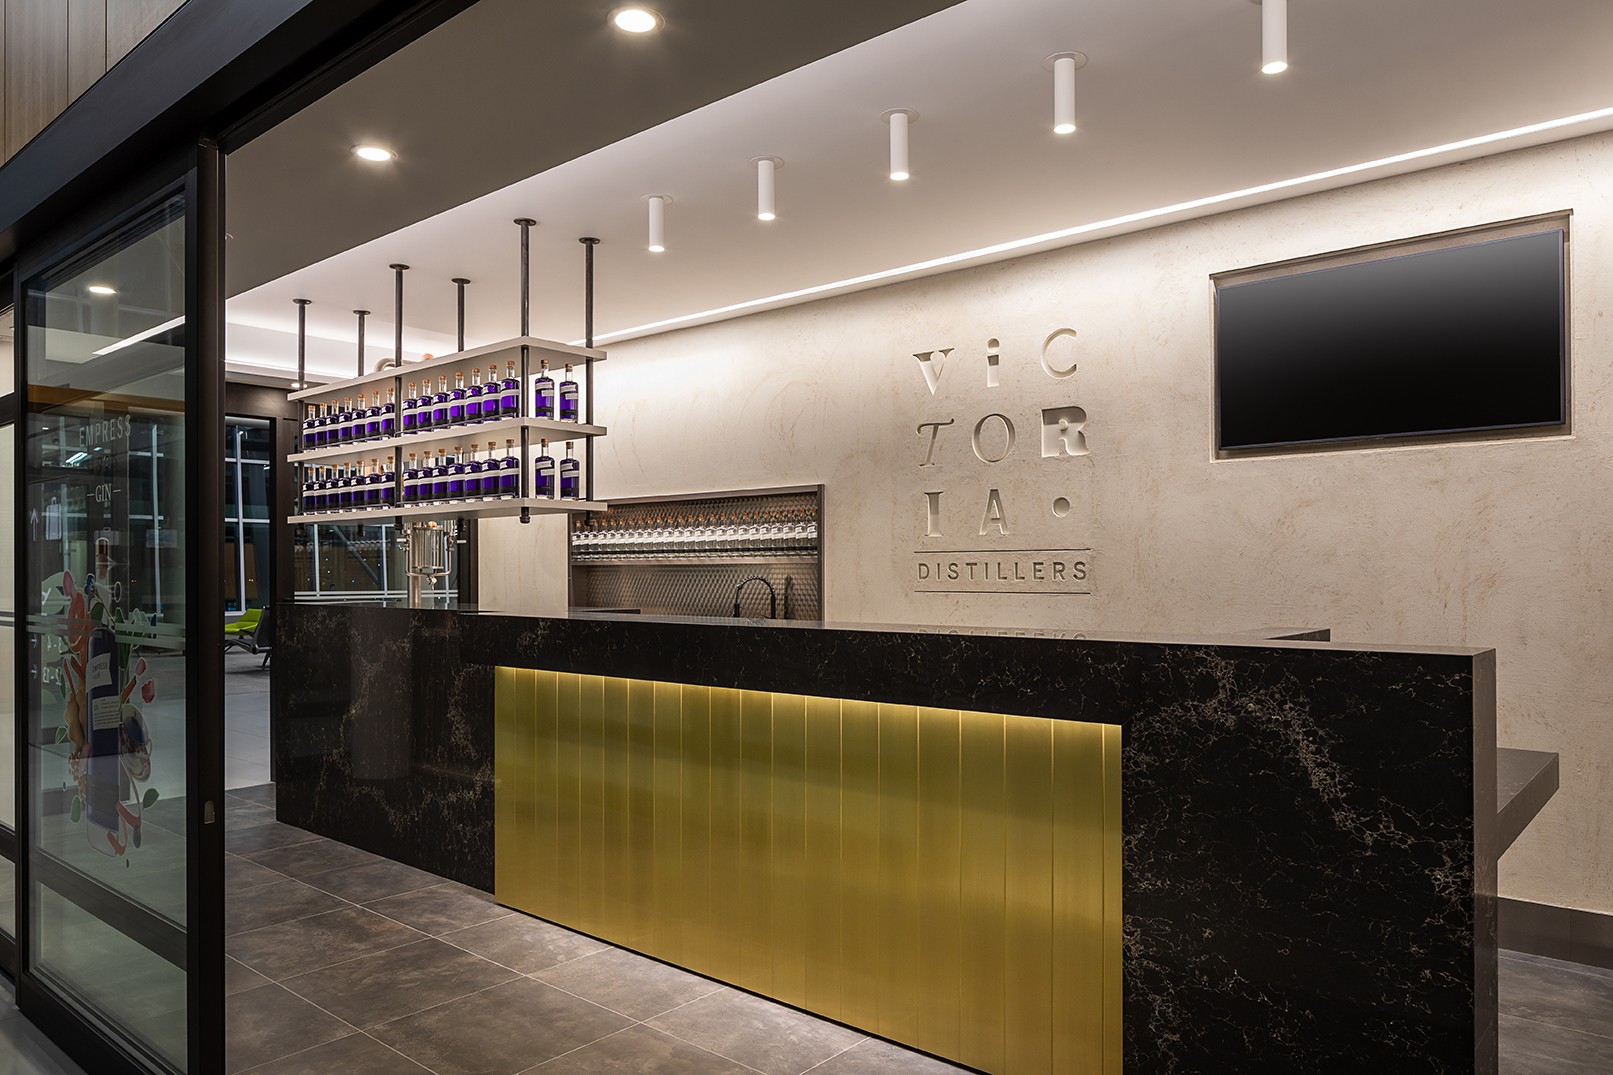 Beautiful bar design at Victoria Distillers, showing interior finish, gold accented with marble bar, by Cutler